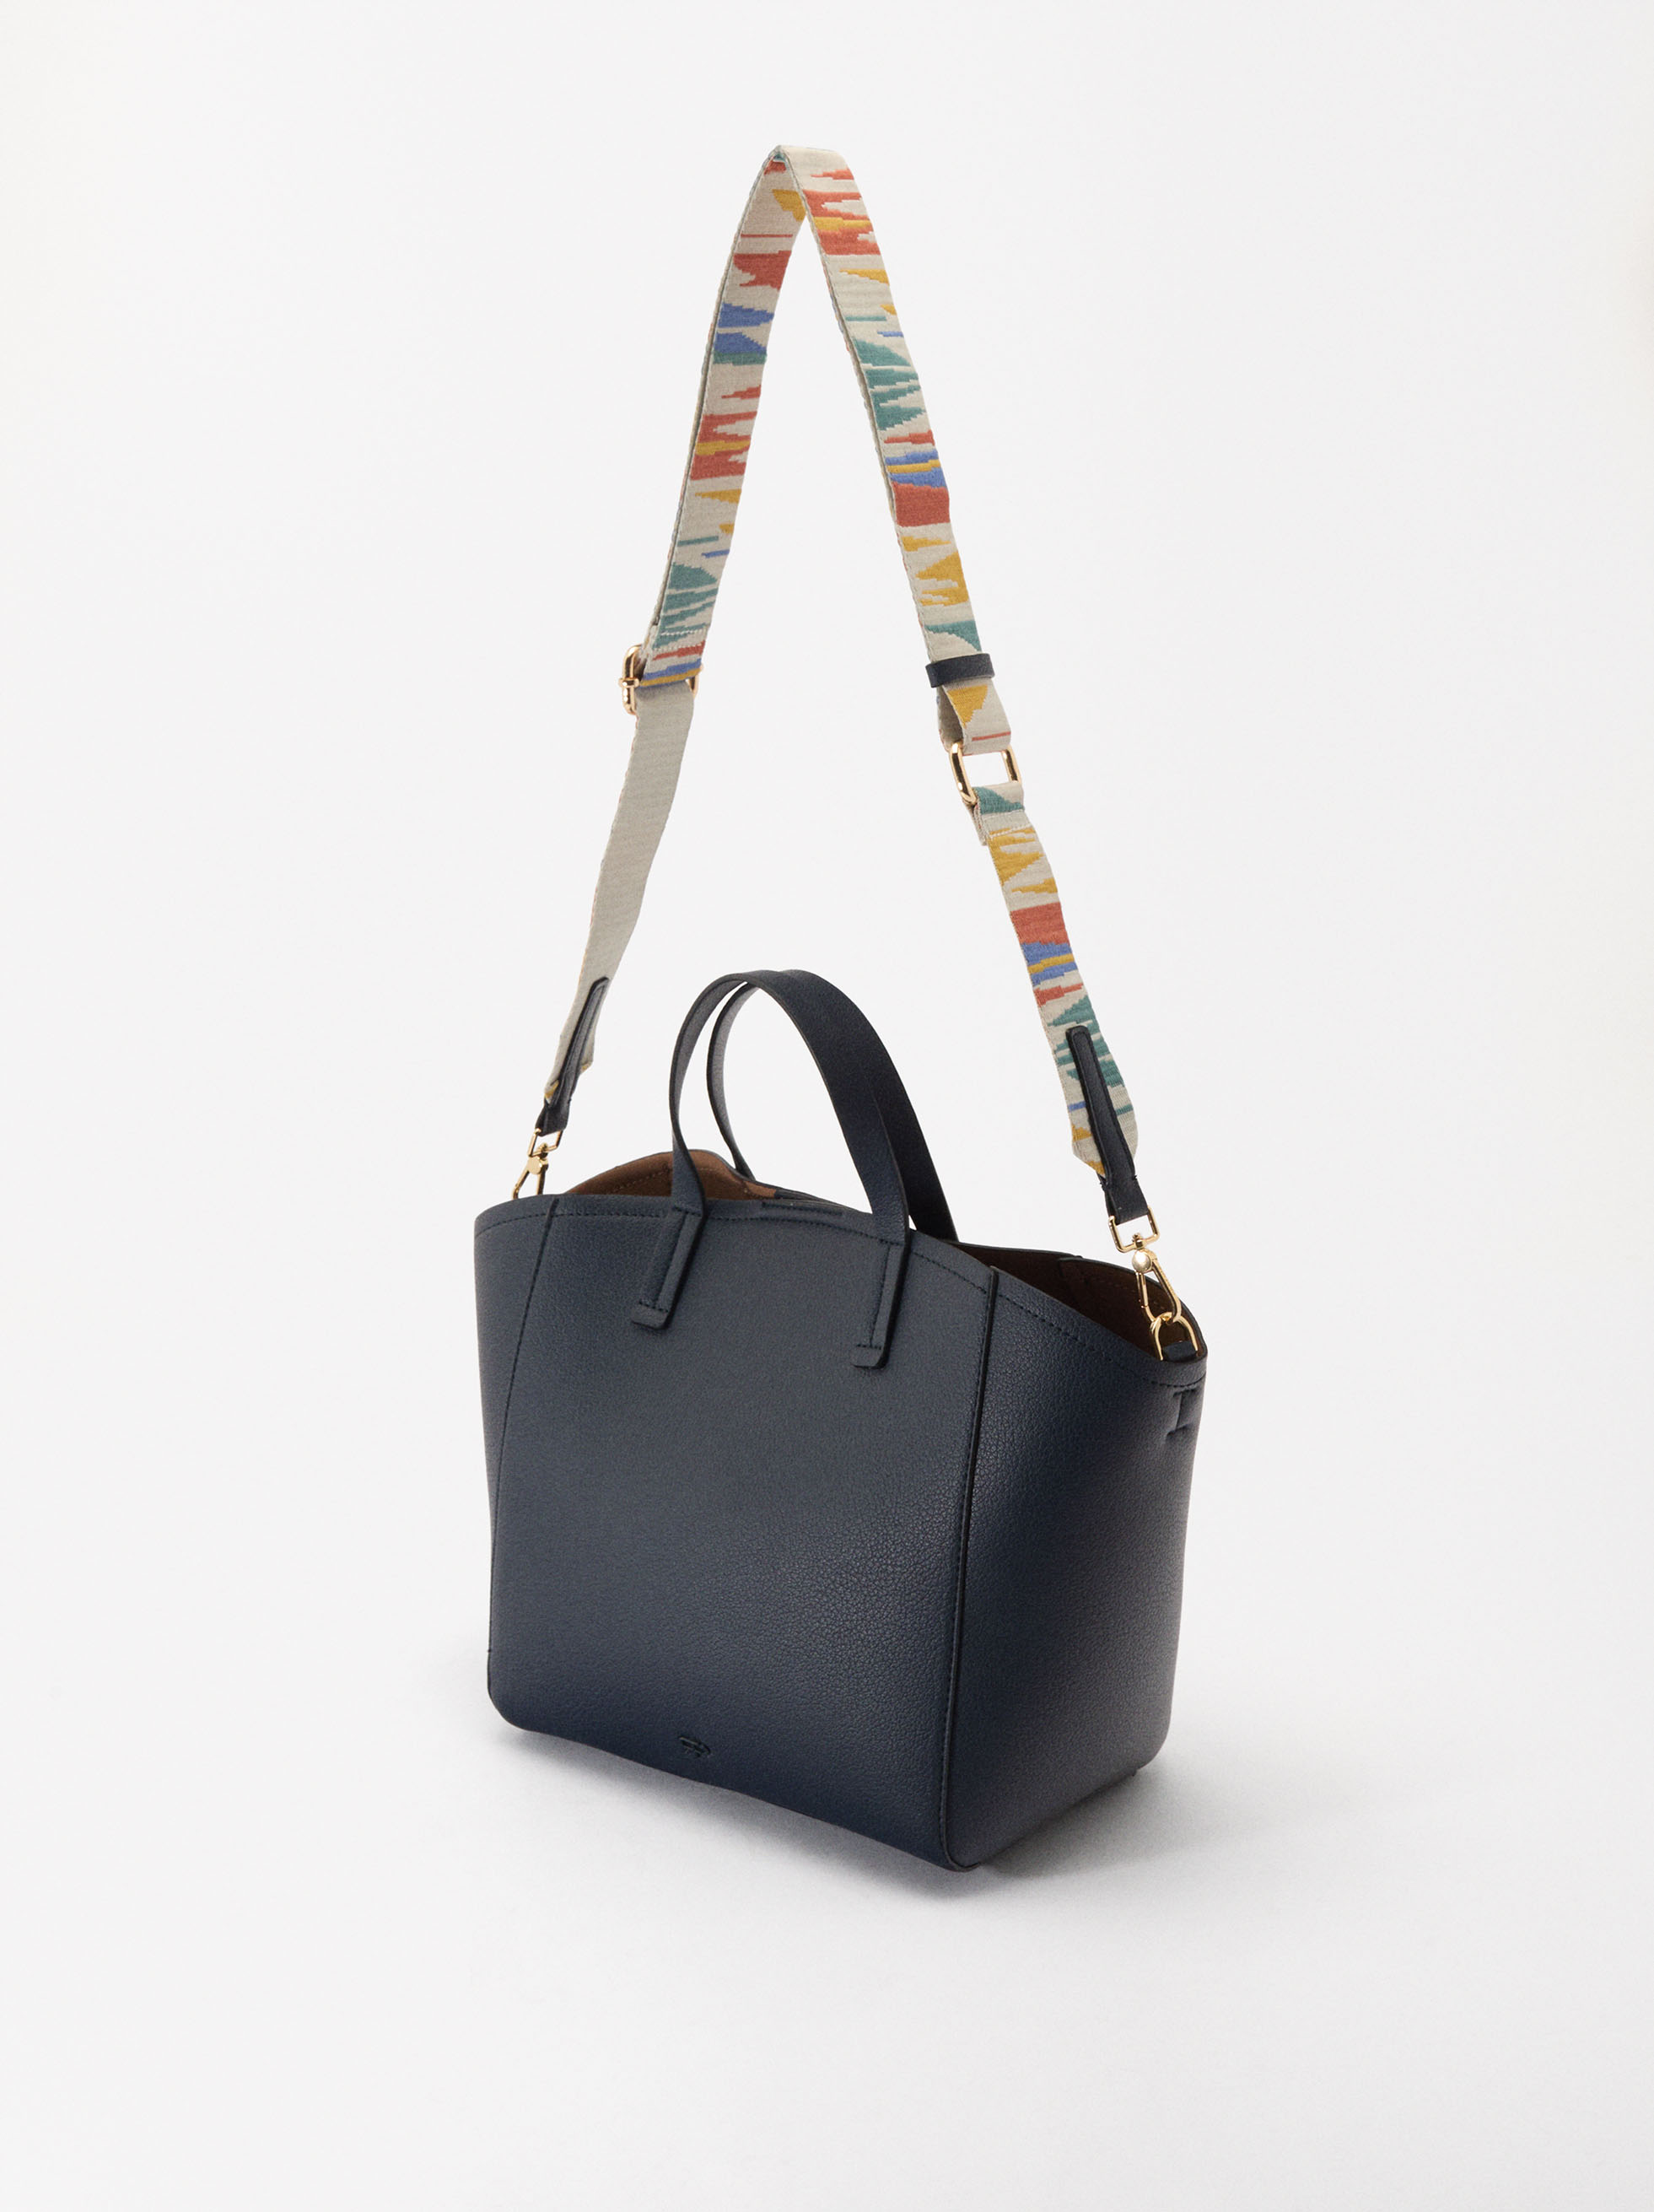 Tote Bag With Interchangeable Straps image number 4.0